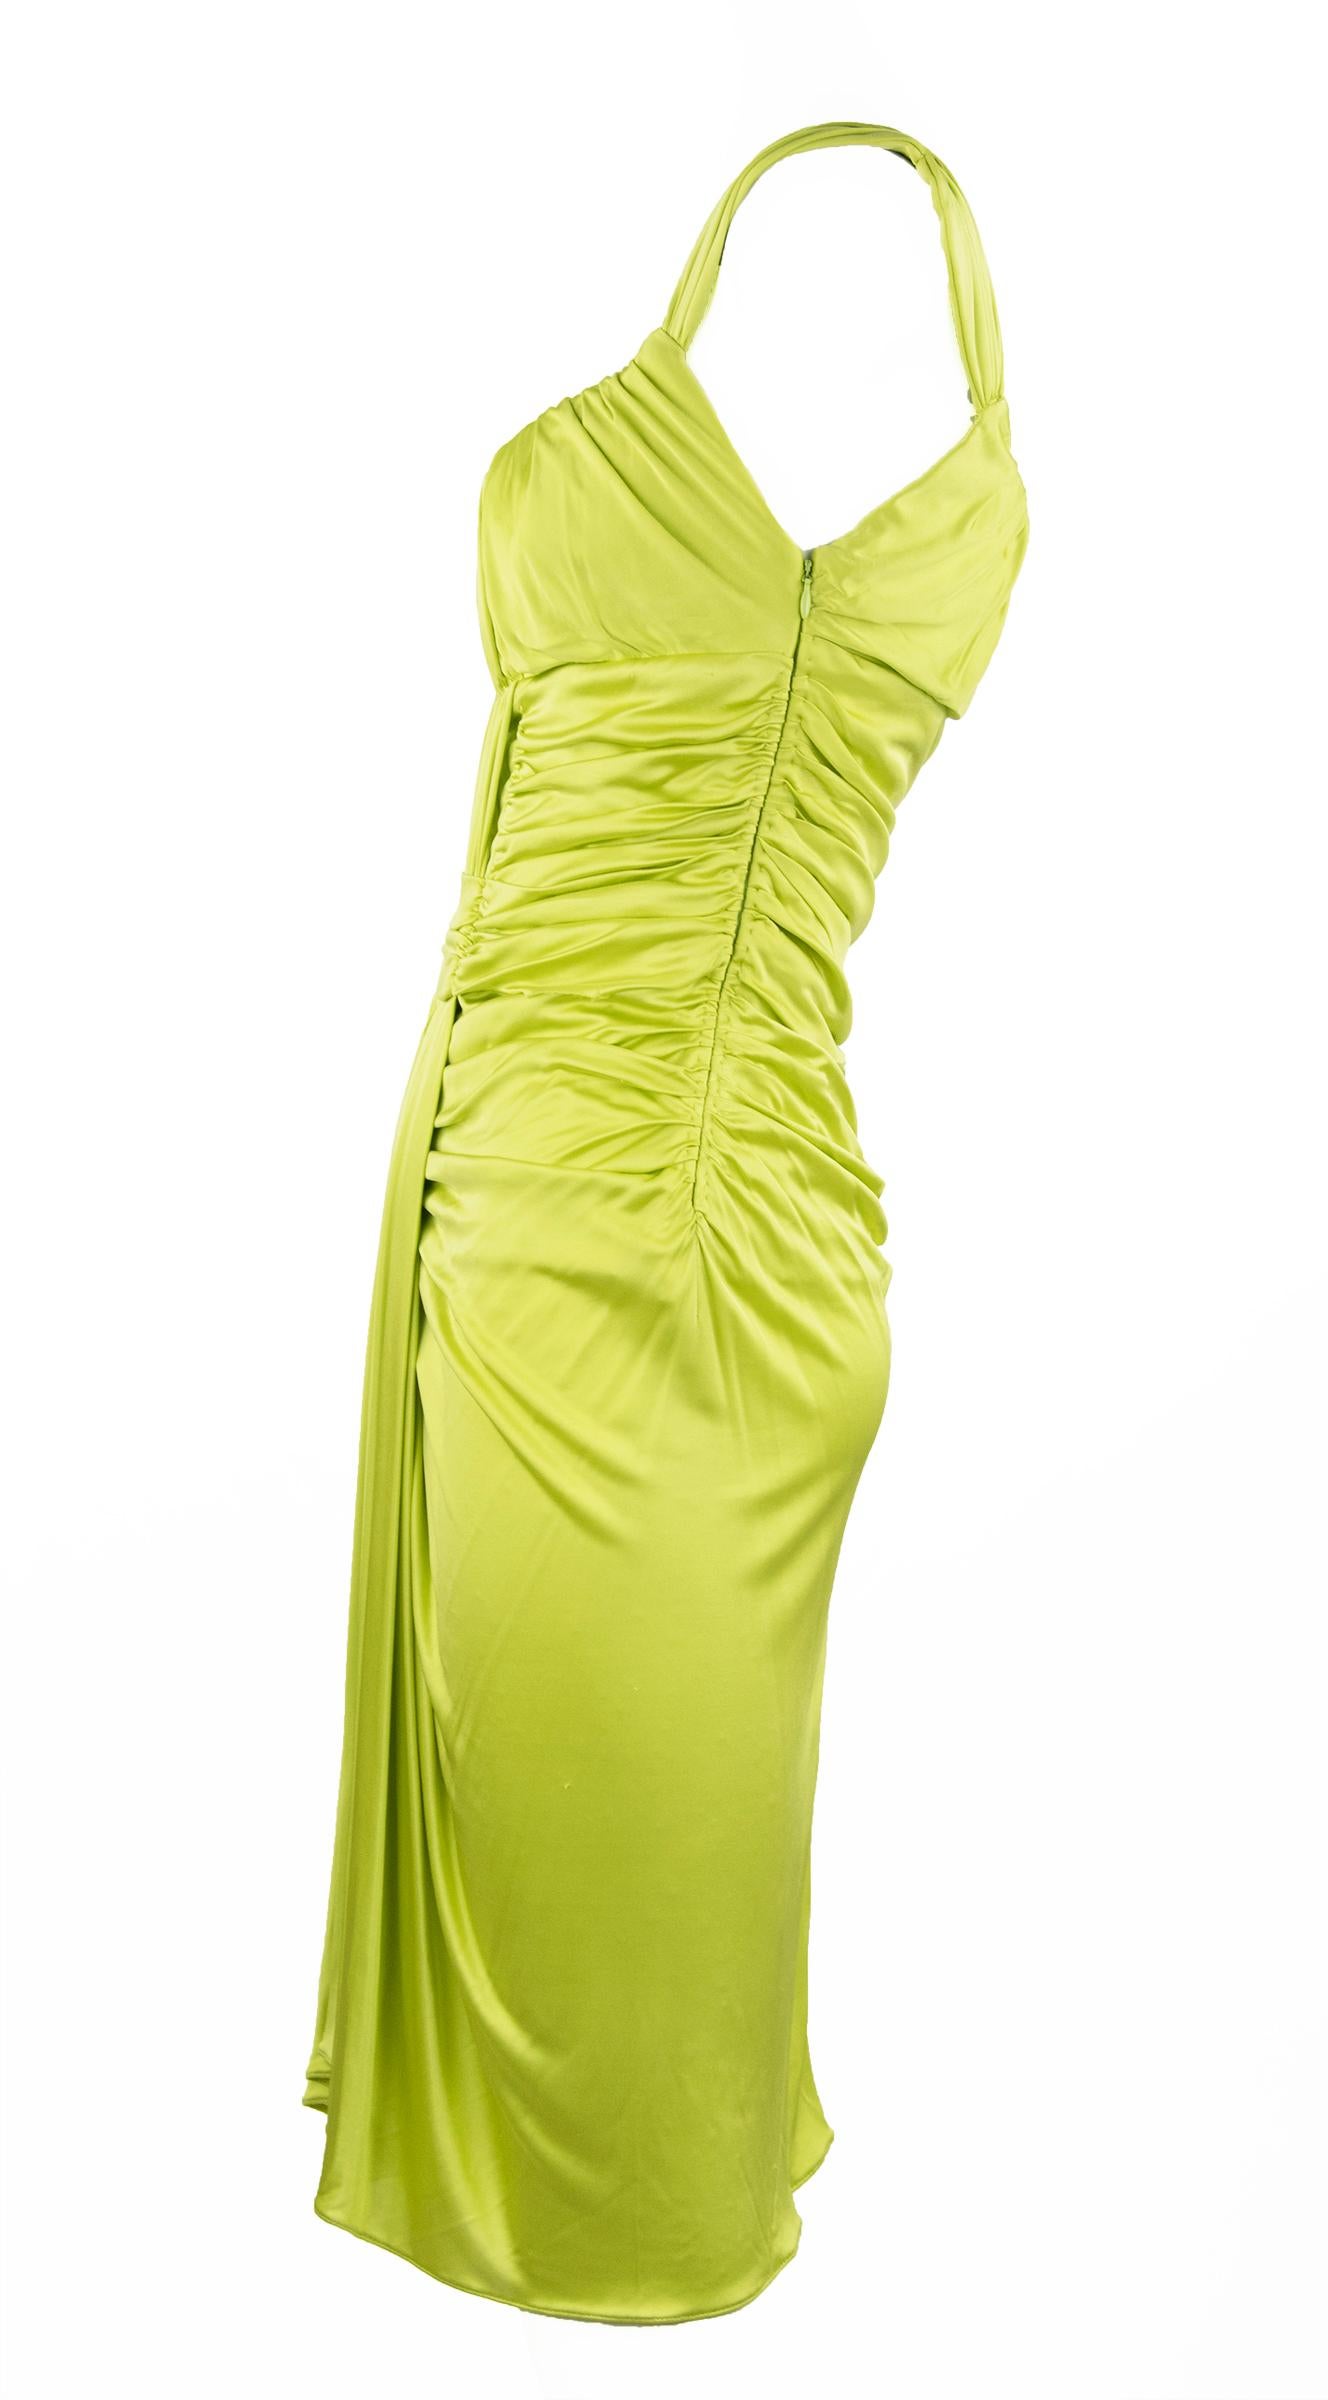 Fun and vibrant bright green silk jersey Emanuel Ungaro cocktail dress.  Beautiful draping and gathering throughout the dress and fitted for a sexy silhouette.  Perfect for a warm weather cocktail party.

Size: IT 40

Condition: New with